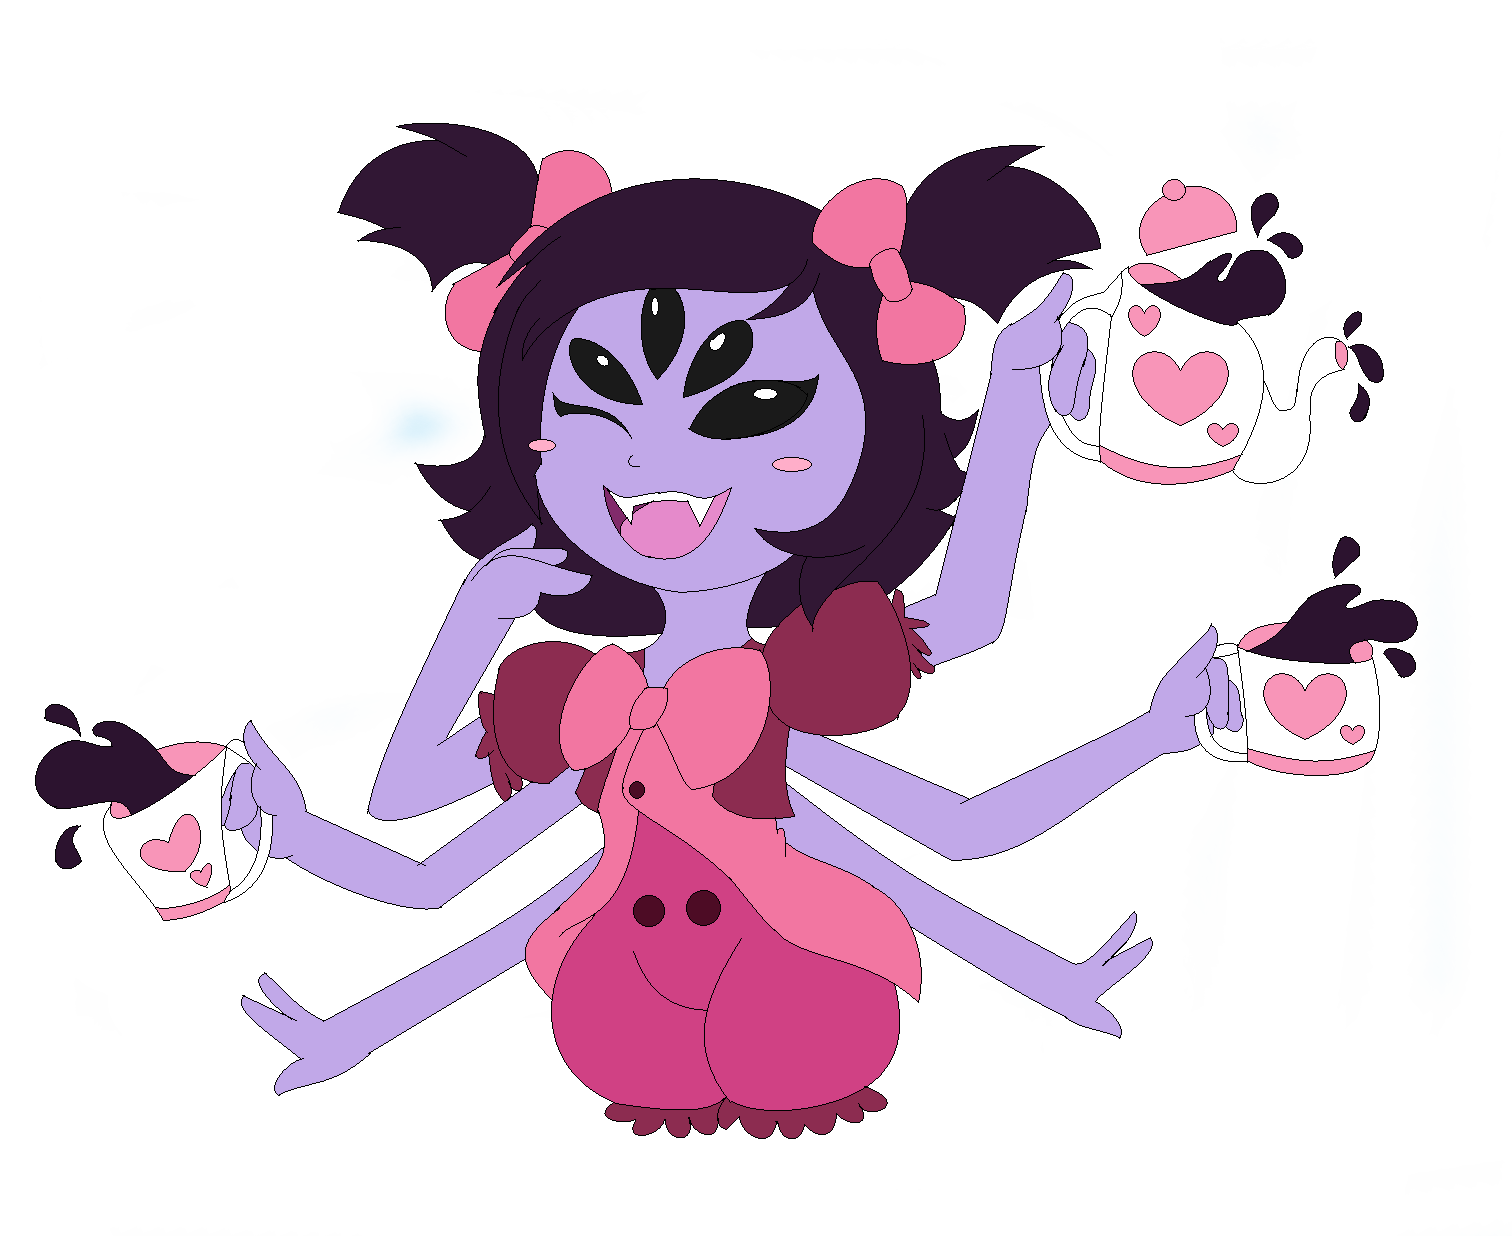 Muffet Is So Cute By X UnKnownRituals On DeviantArt.